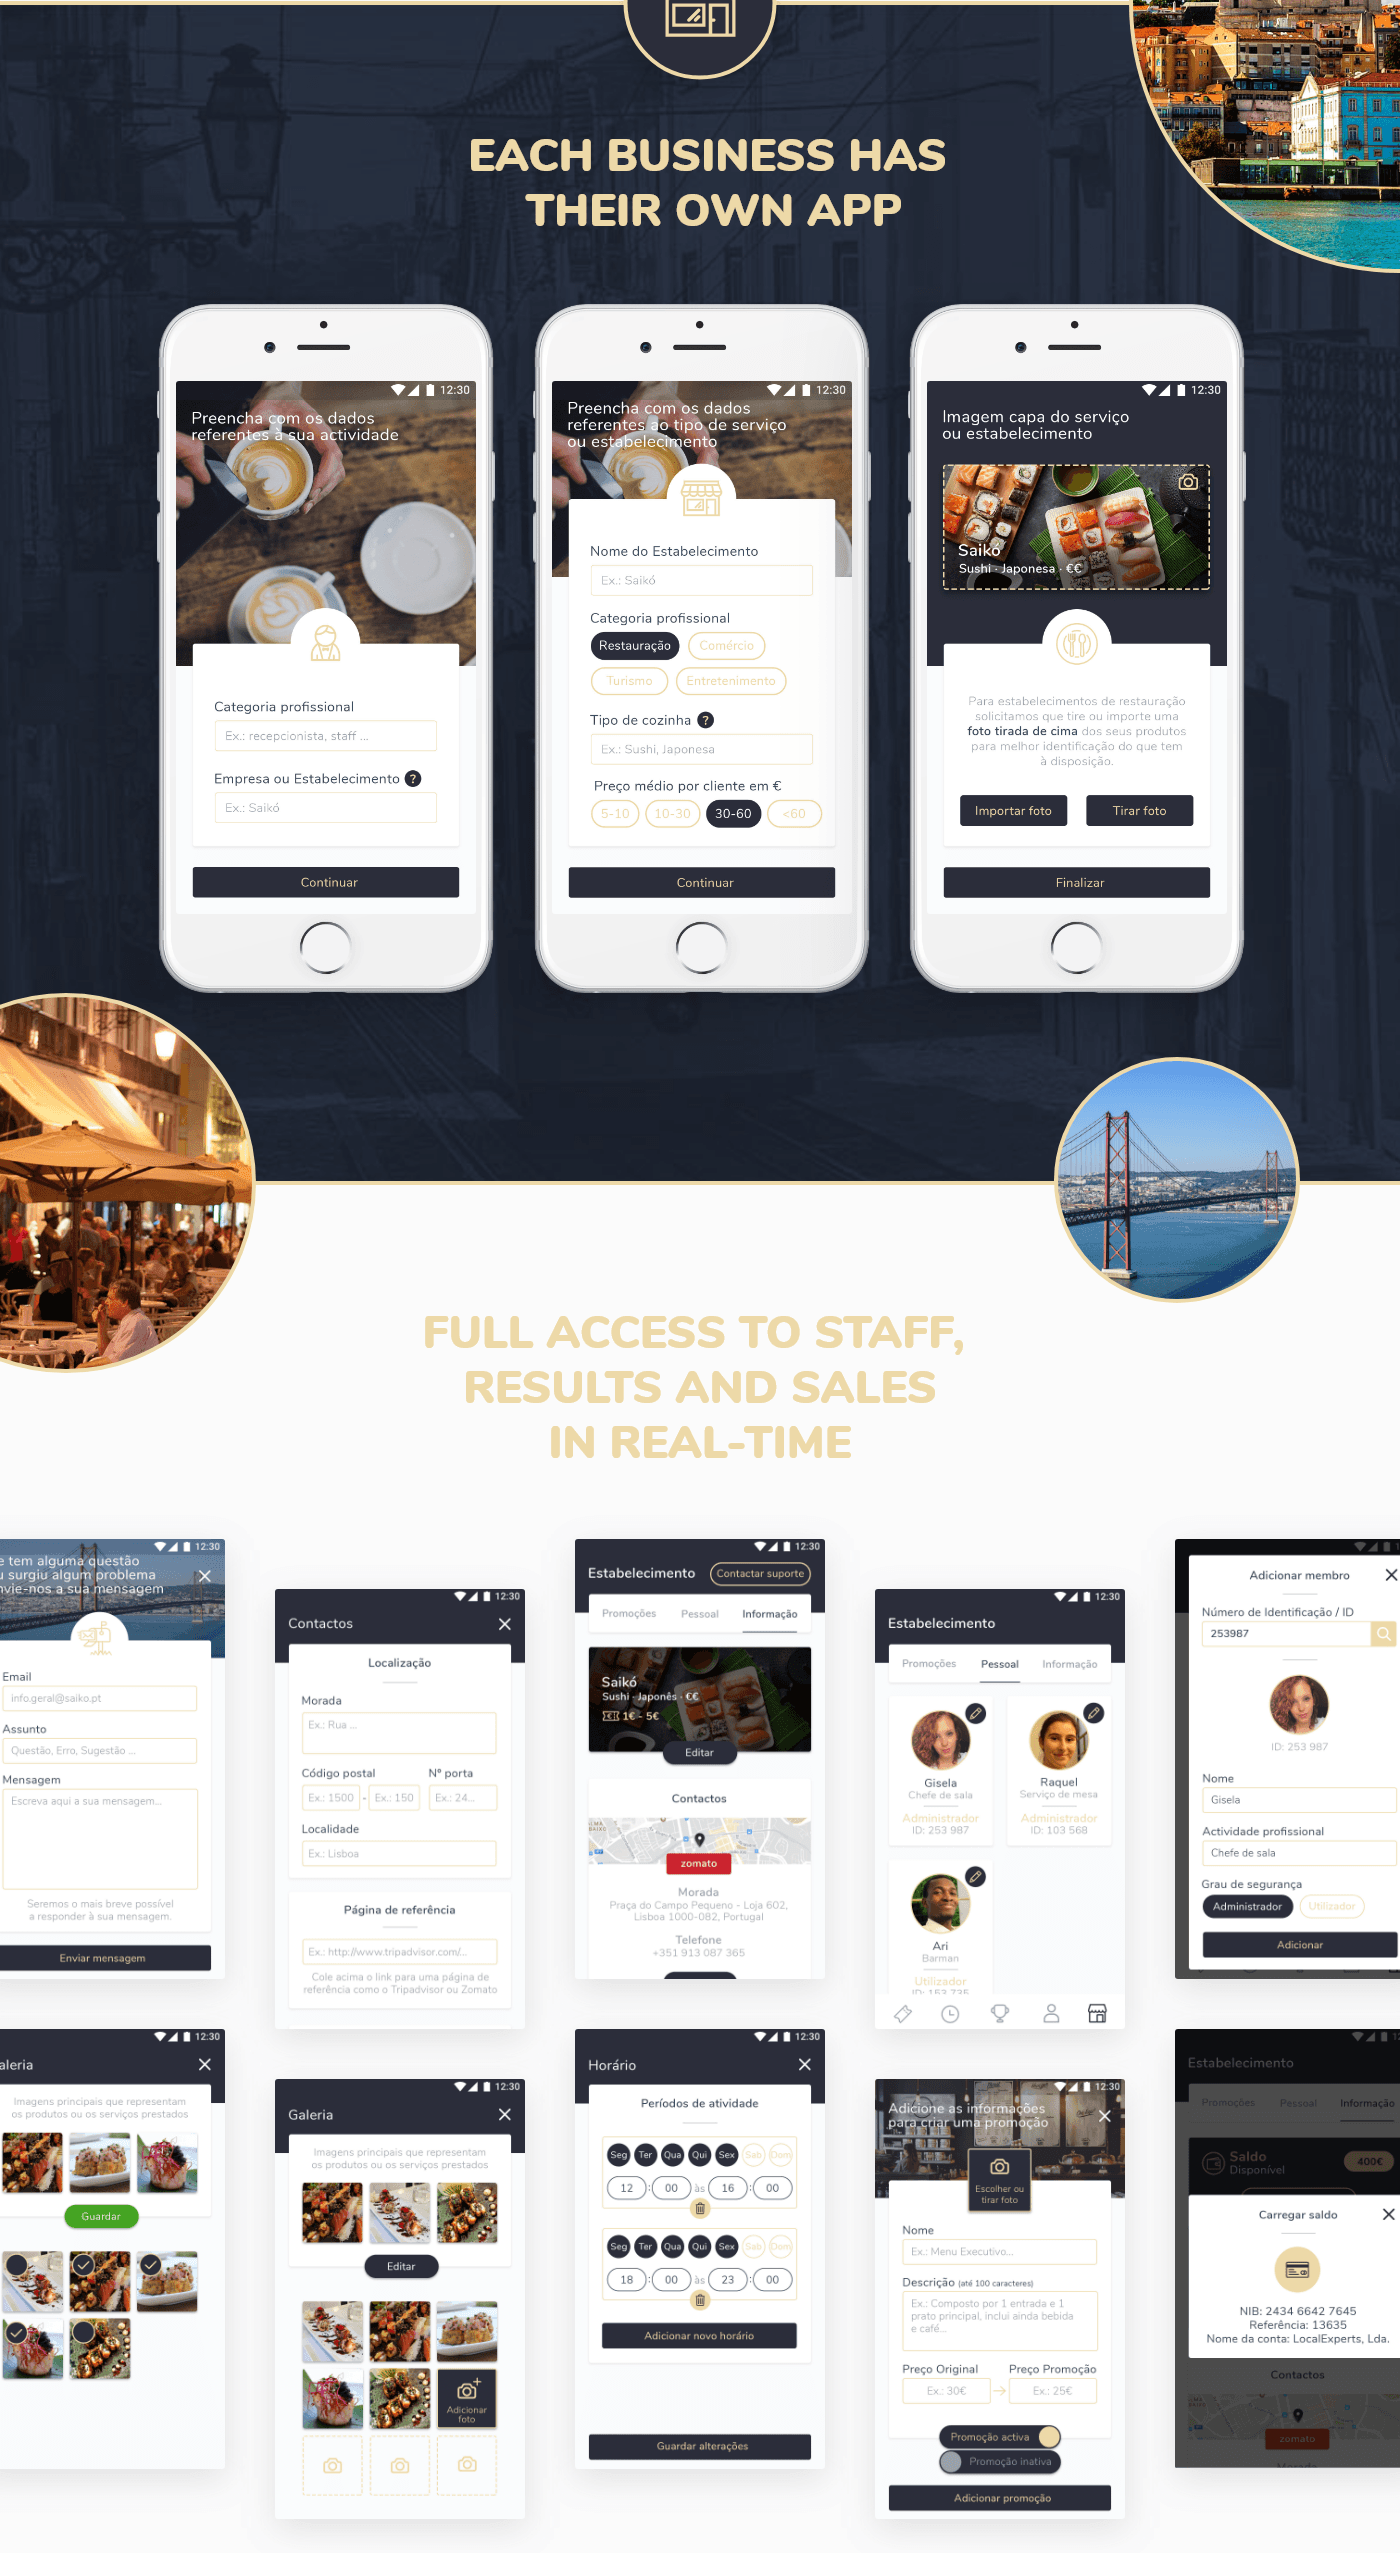 /interface/portfolio/local-experts/local-experts-2.png